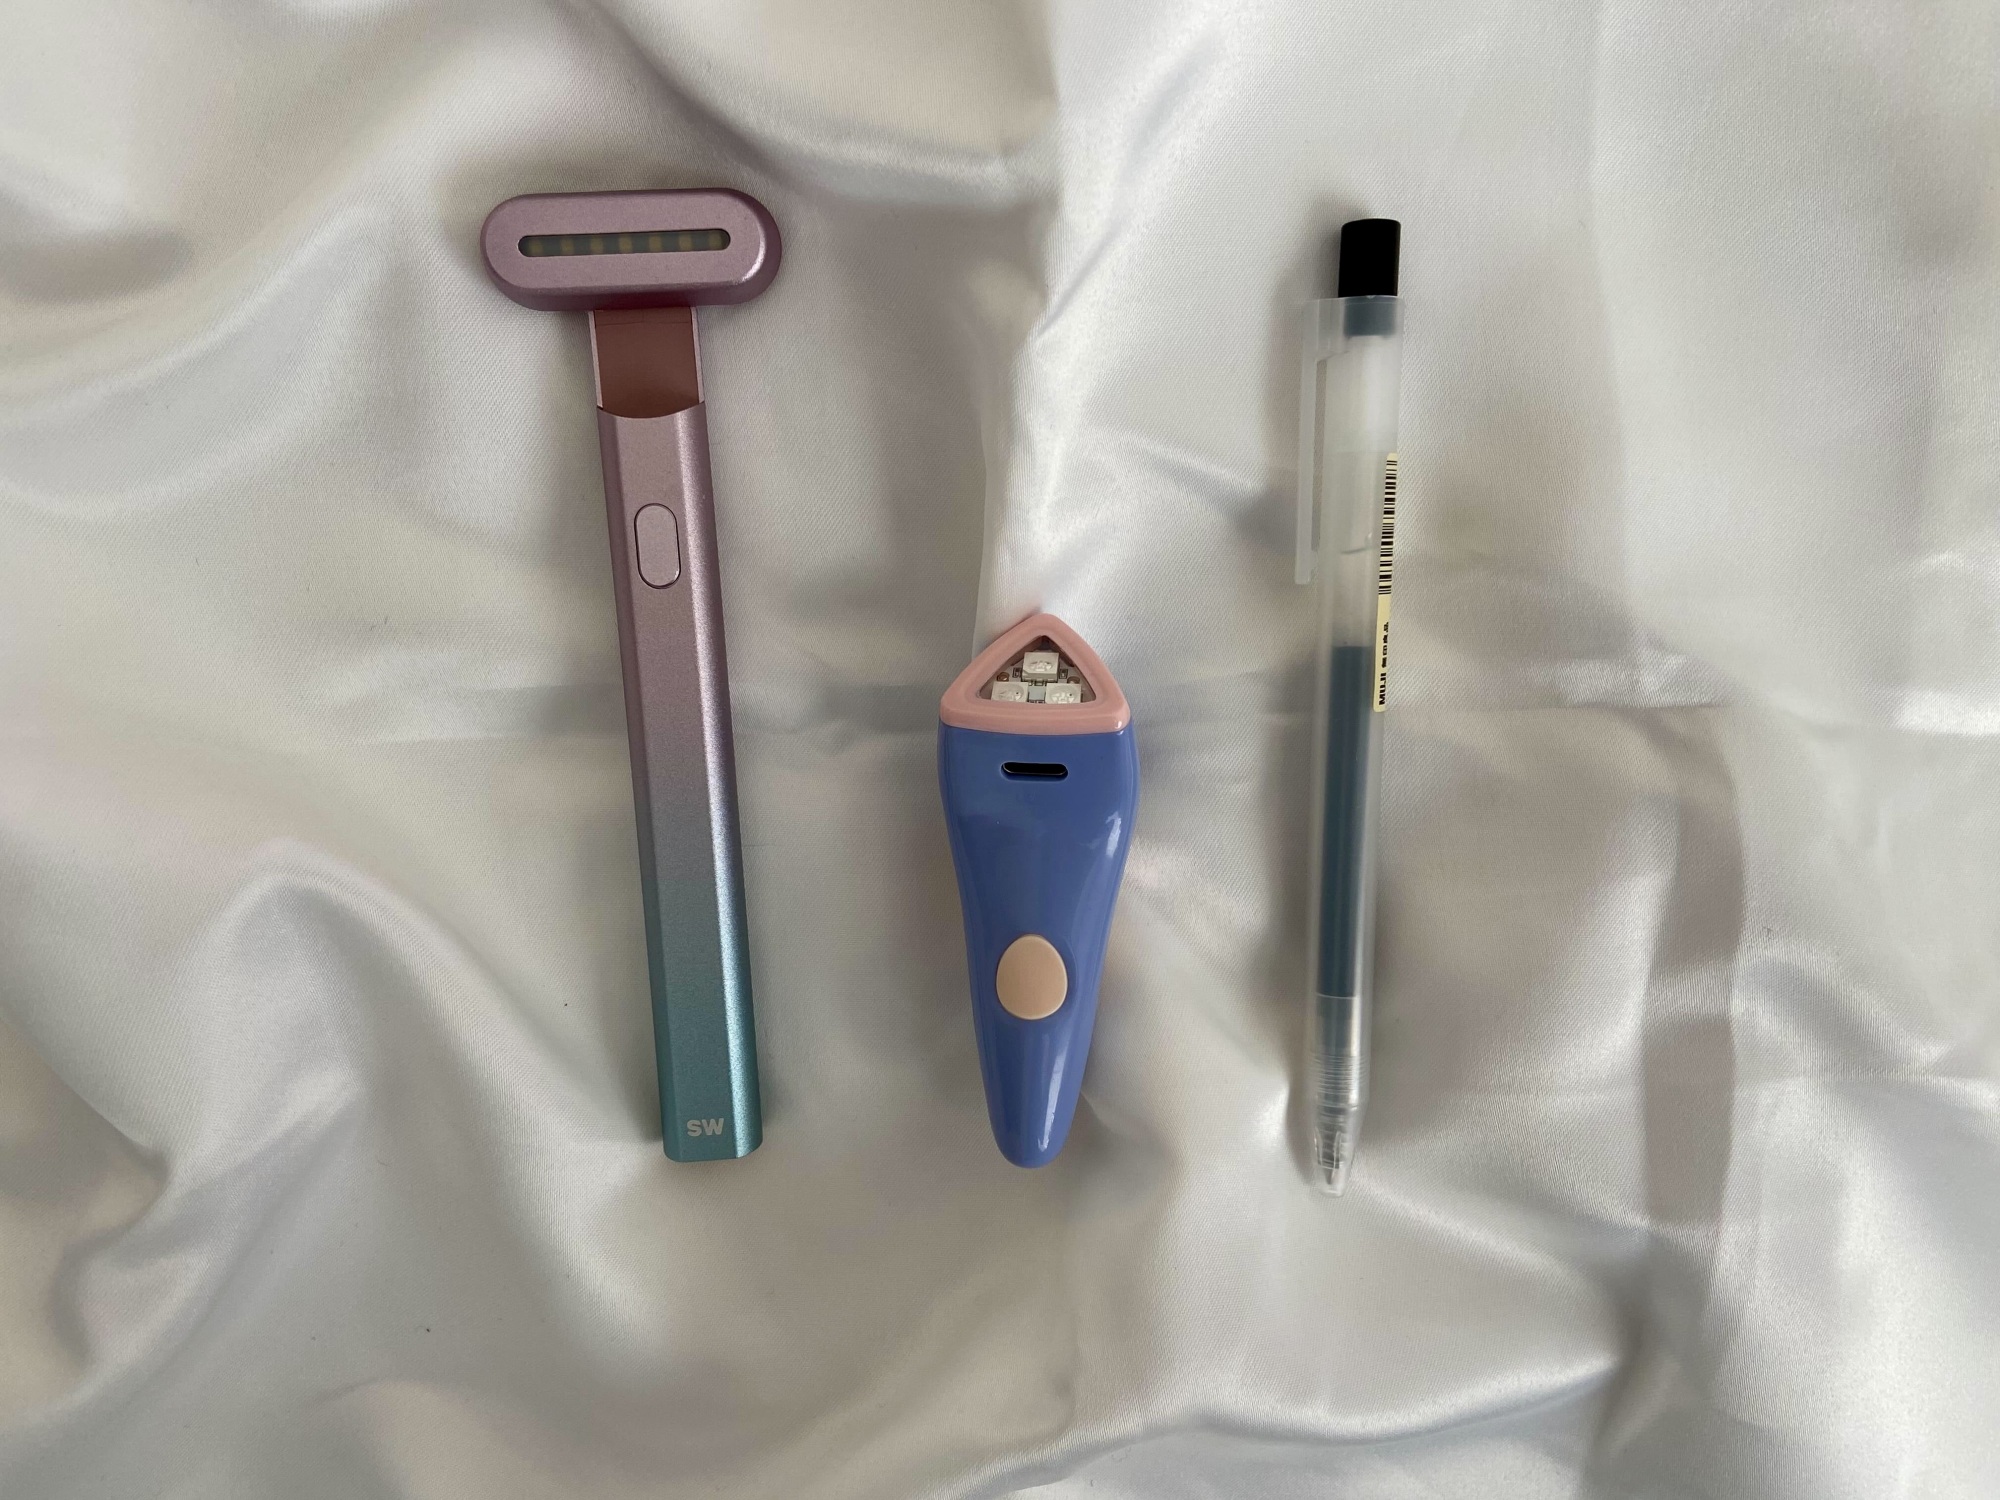 solawave rejuvenating wand, solawave bye acne device, and a muji